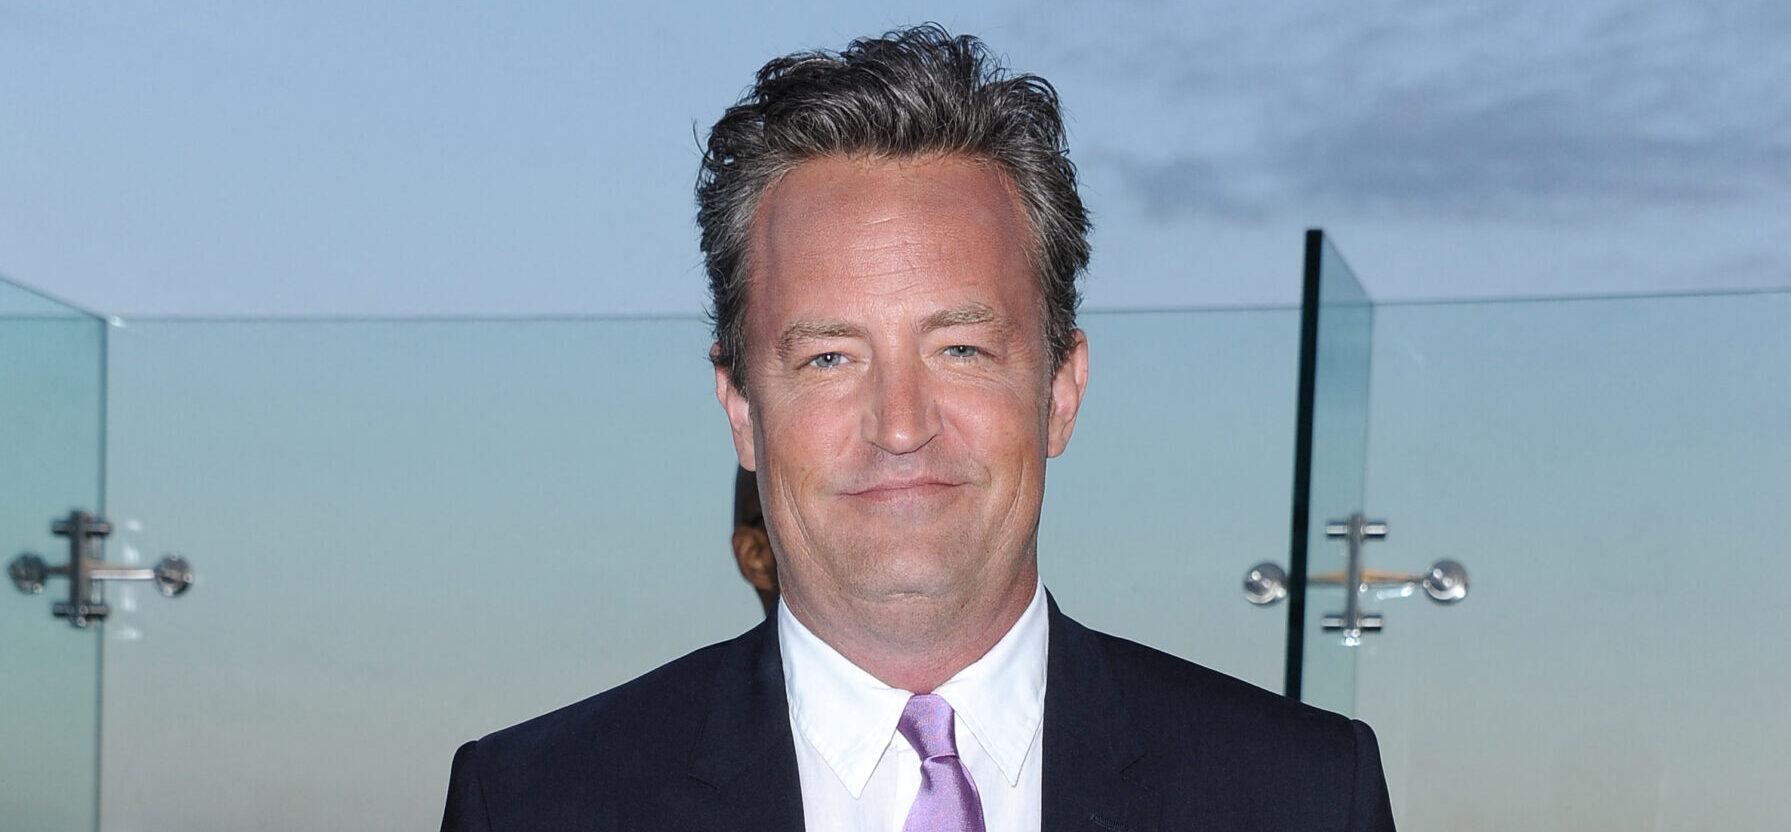 Matthew Perry’s Initial Toxicology Report Finds No Evidence Of Fentanyl Or Meth